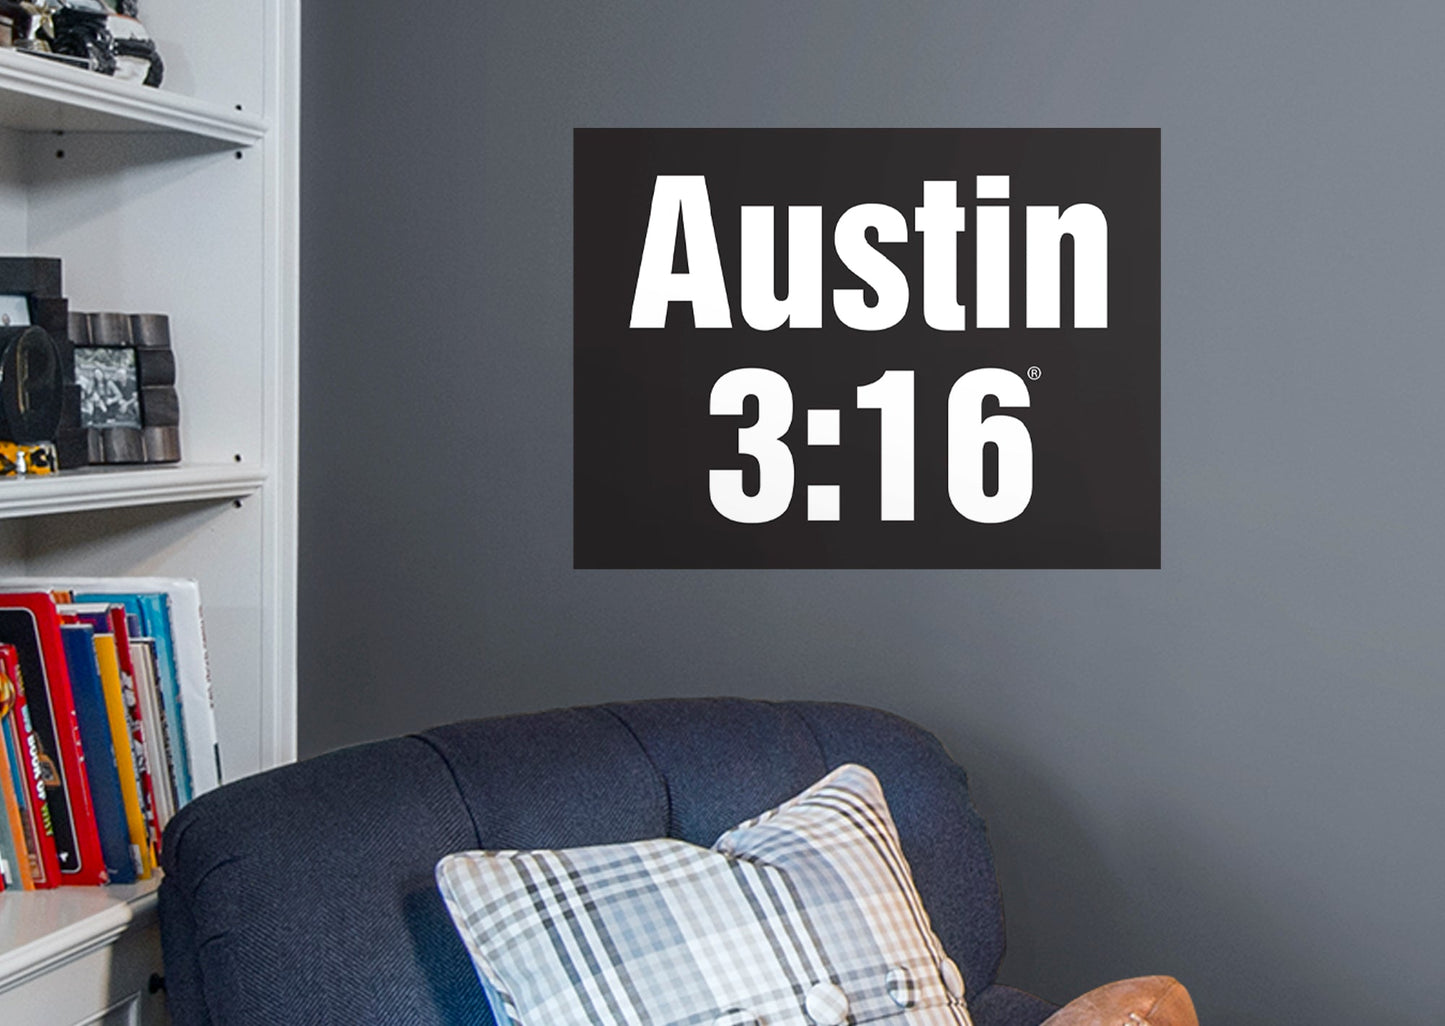 Stone Cold Steve Austin  Austin 3:16 Mural        - Officially Licensed WWE Removable Wall   Adhesive Decal